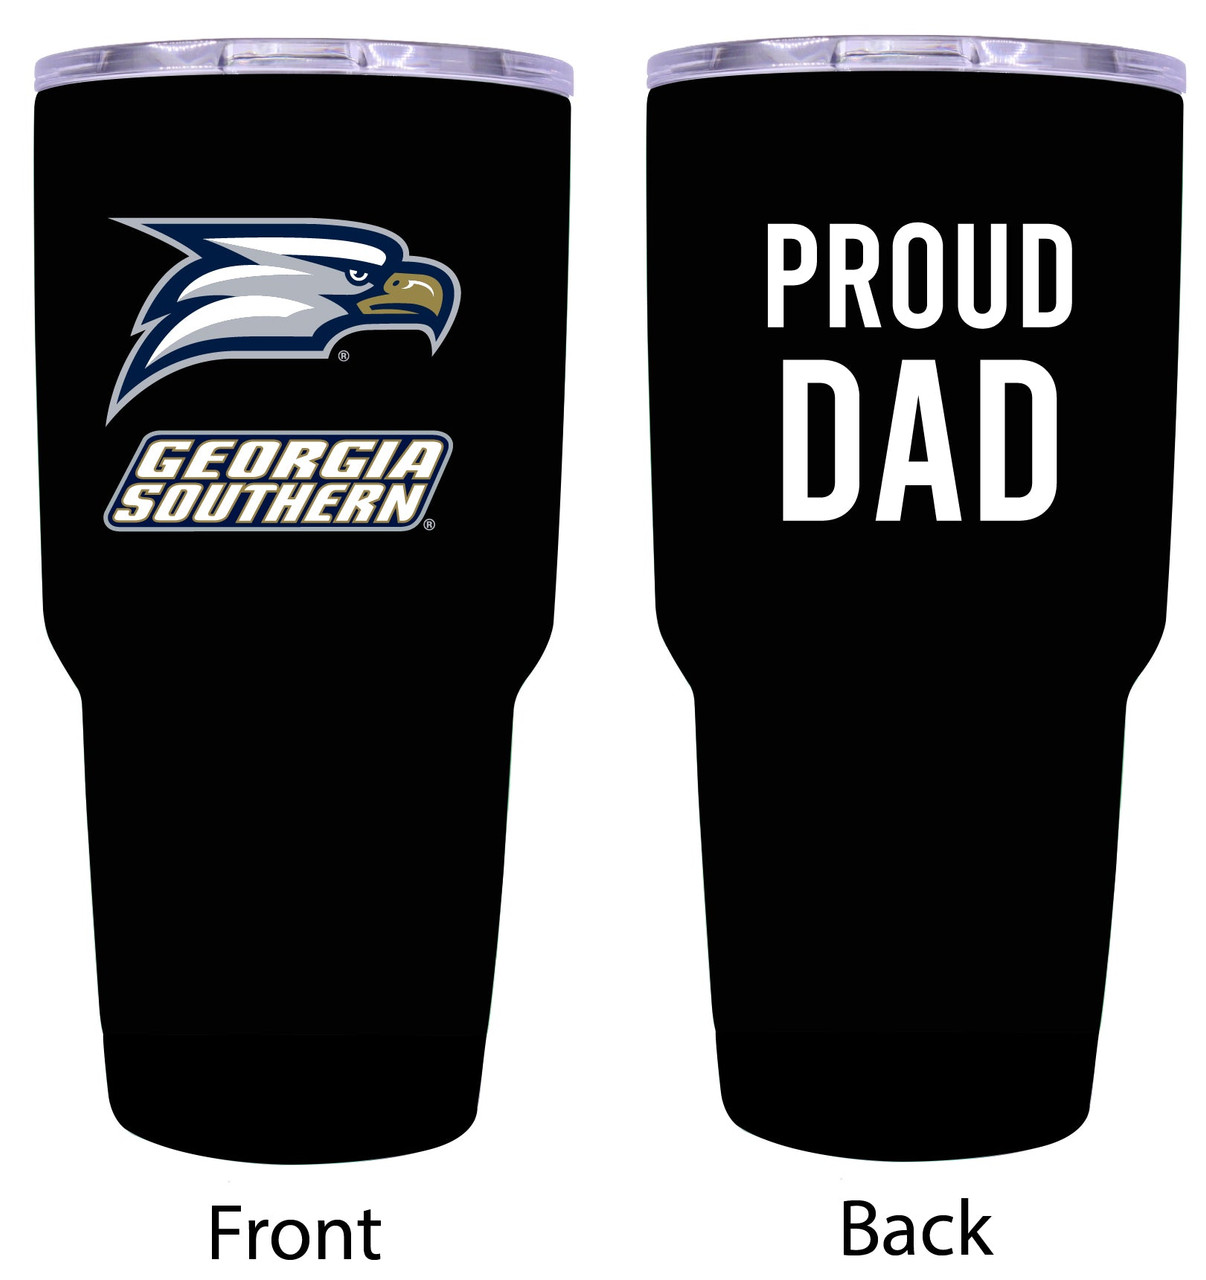 Georgia Southern Eagles Proud Dad 24 oz Insulated Stainless Steel Tumblers Black.